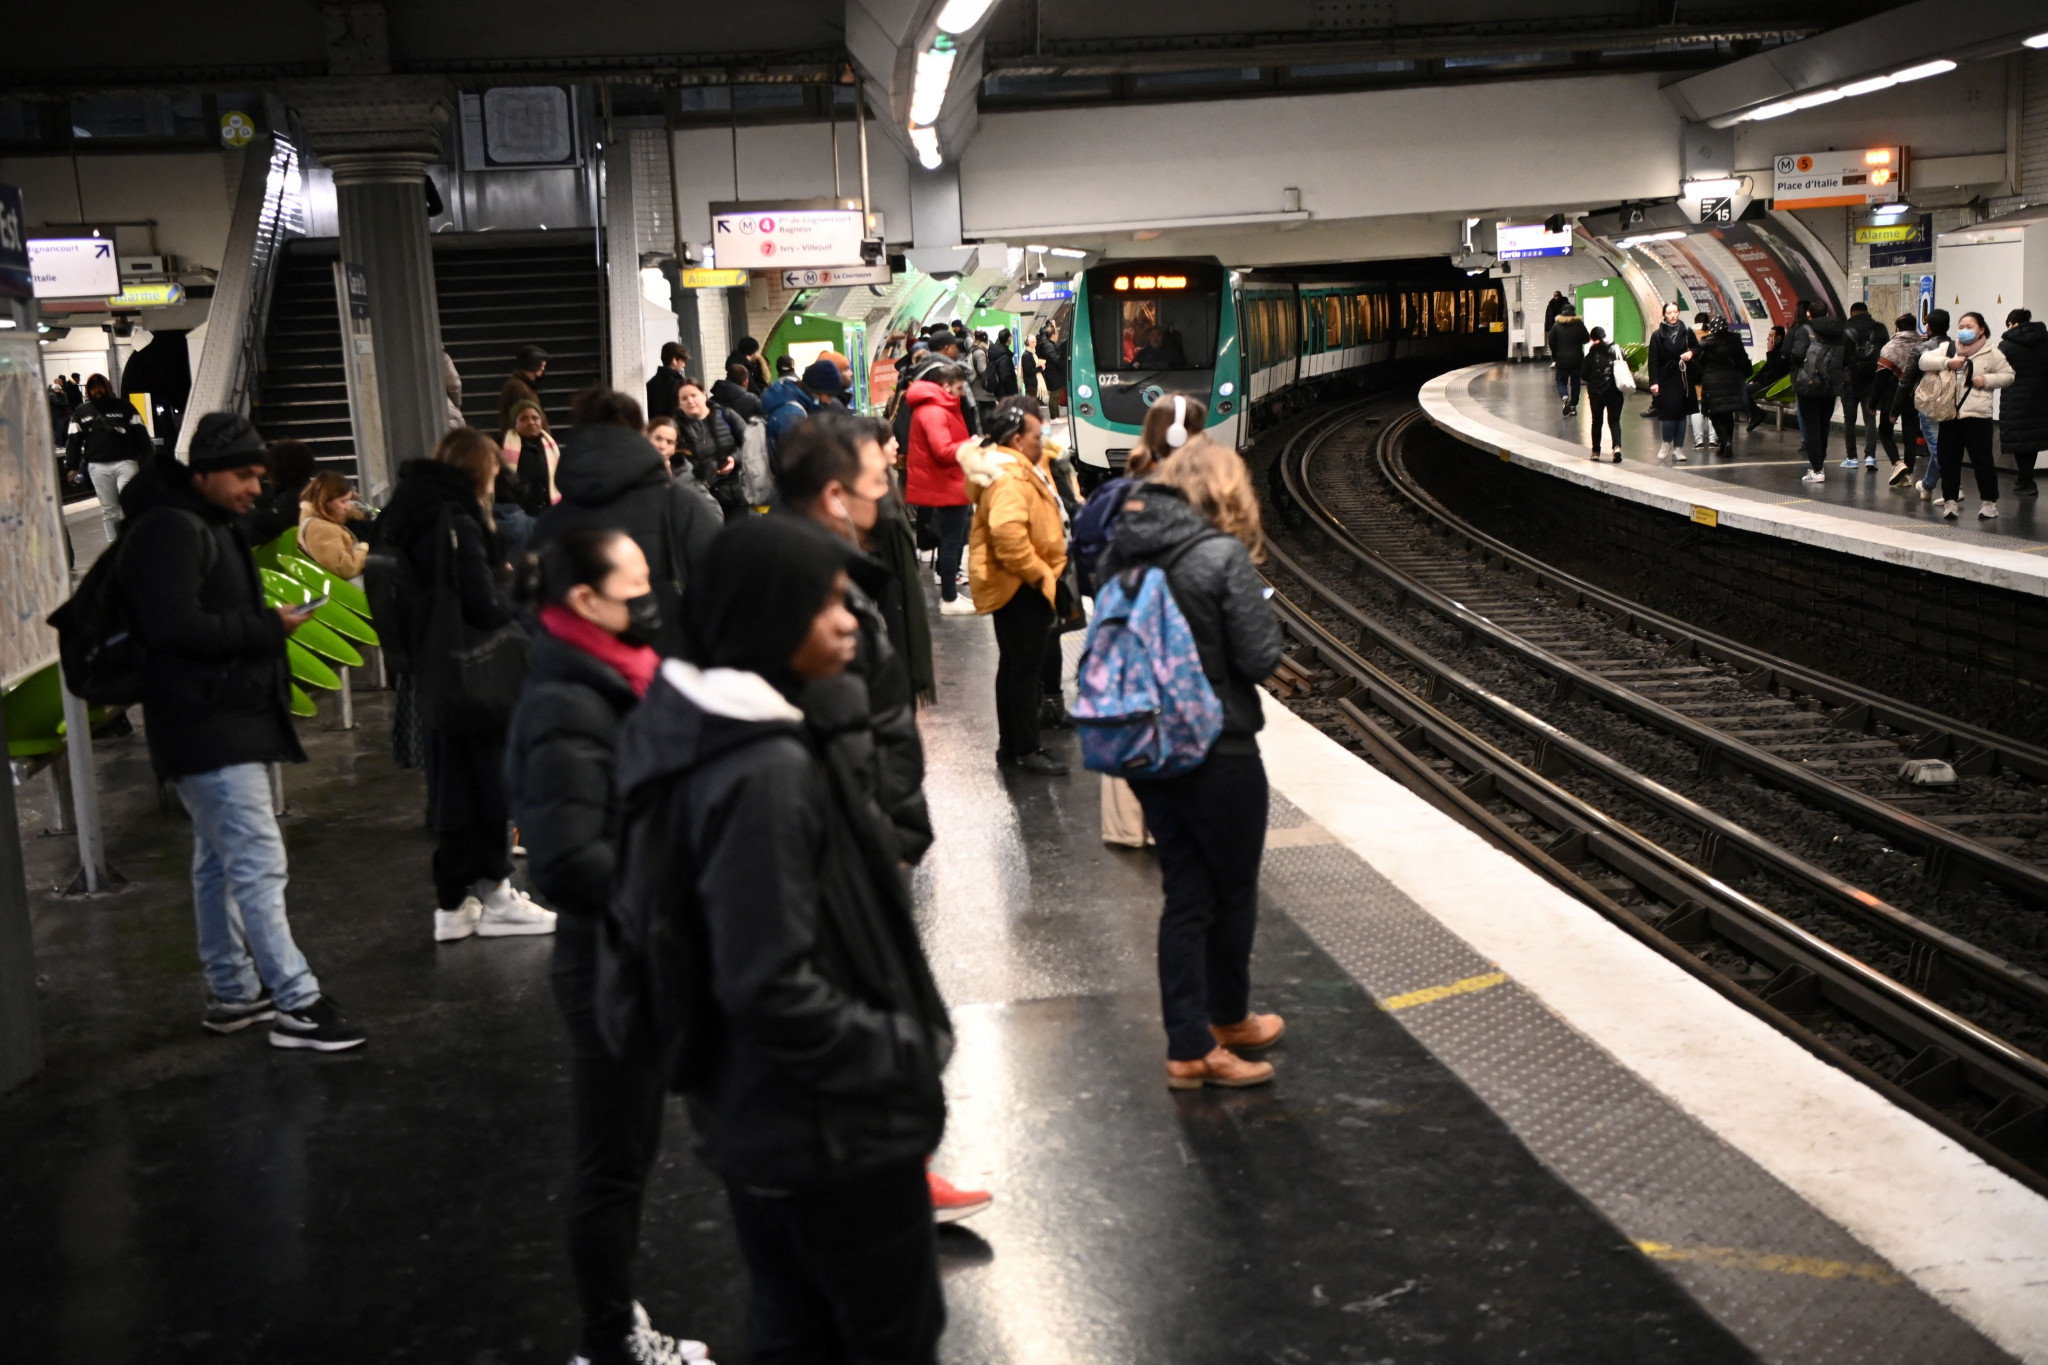 Transport bodies commit to improving accessibility in build-up to Paris 2024